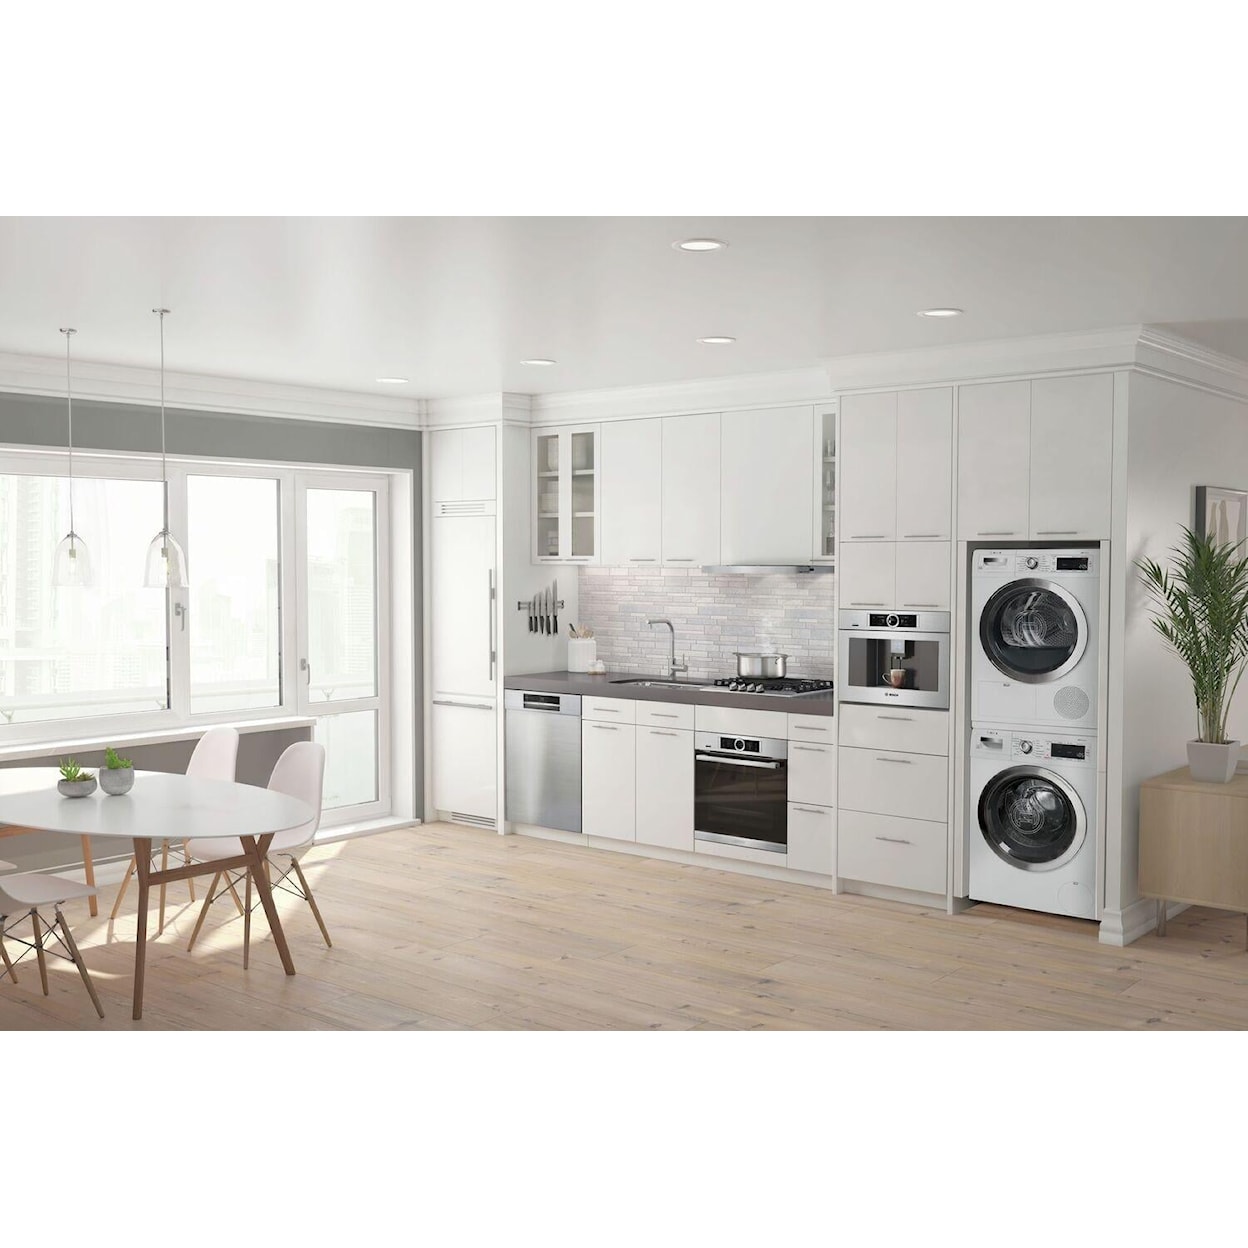 Bosch Electric Ranges Single Wall Electric Oven